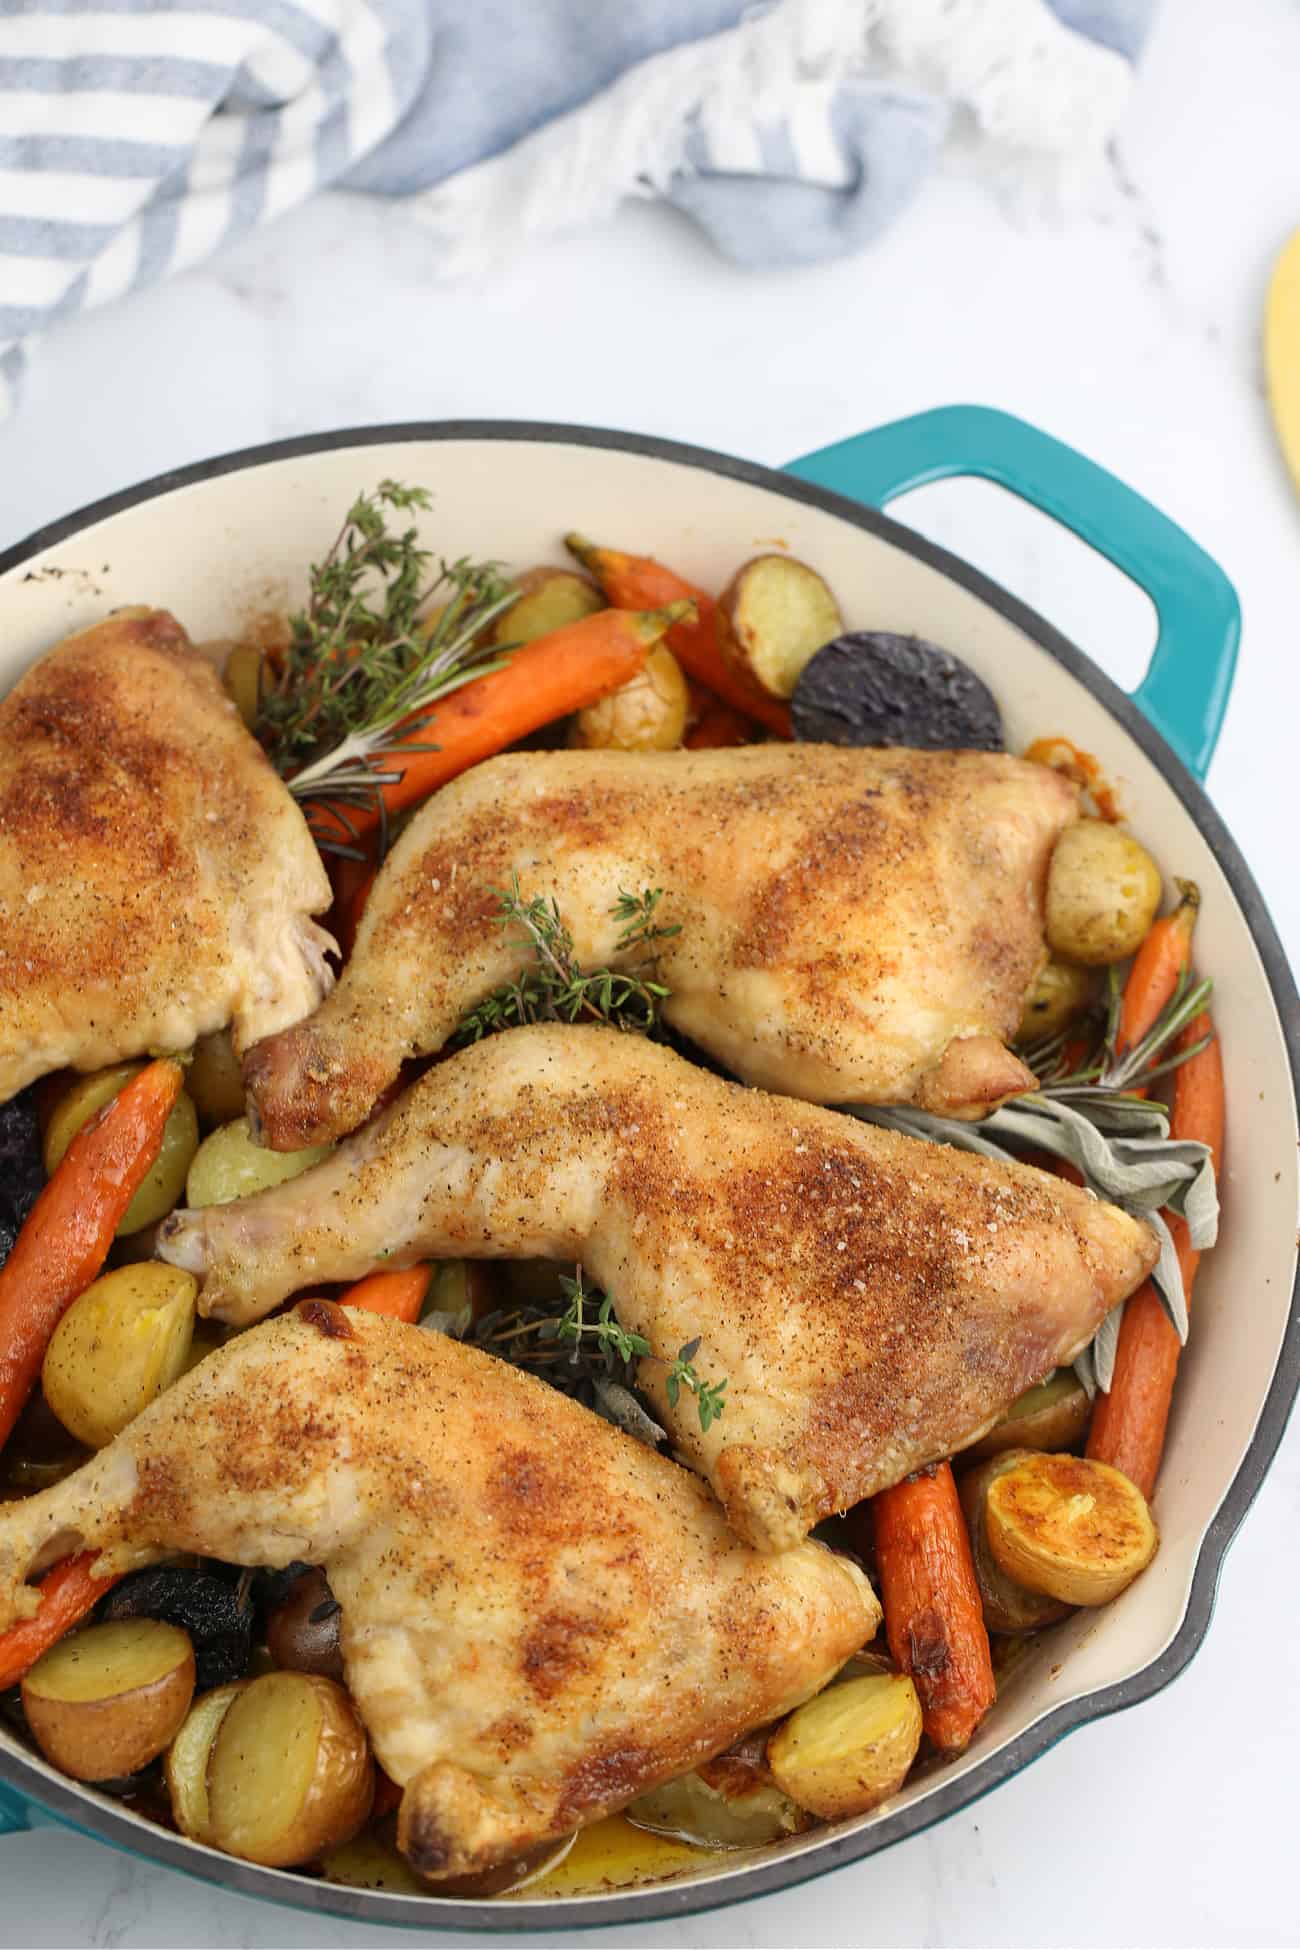 chicken quarters on cooked vegetables in a skillet